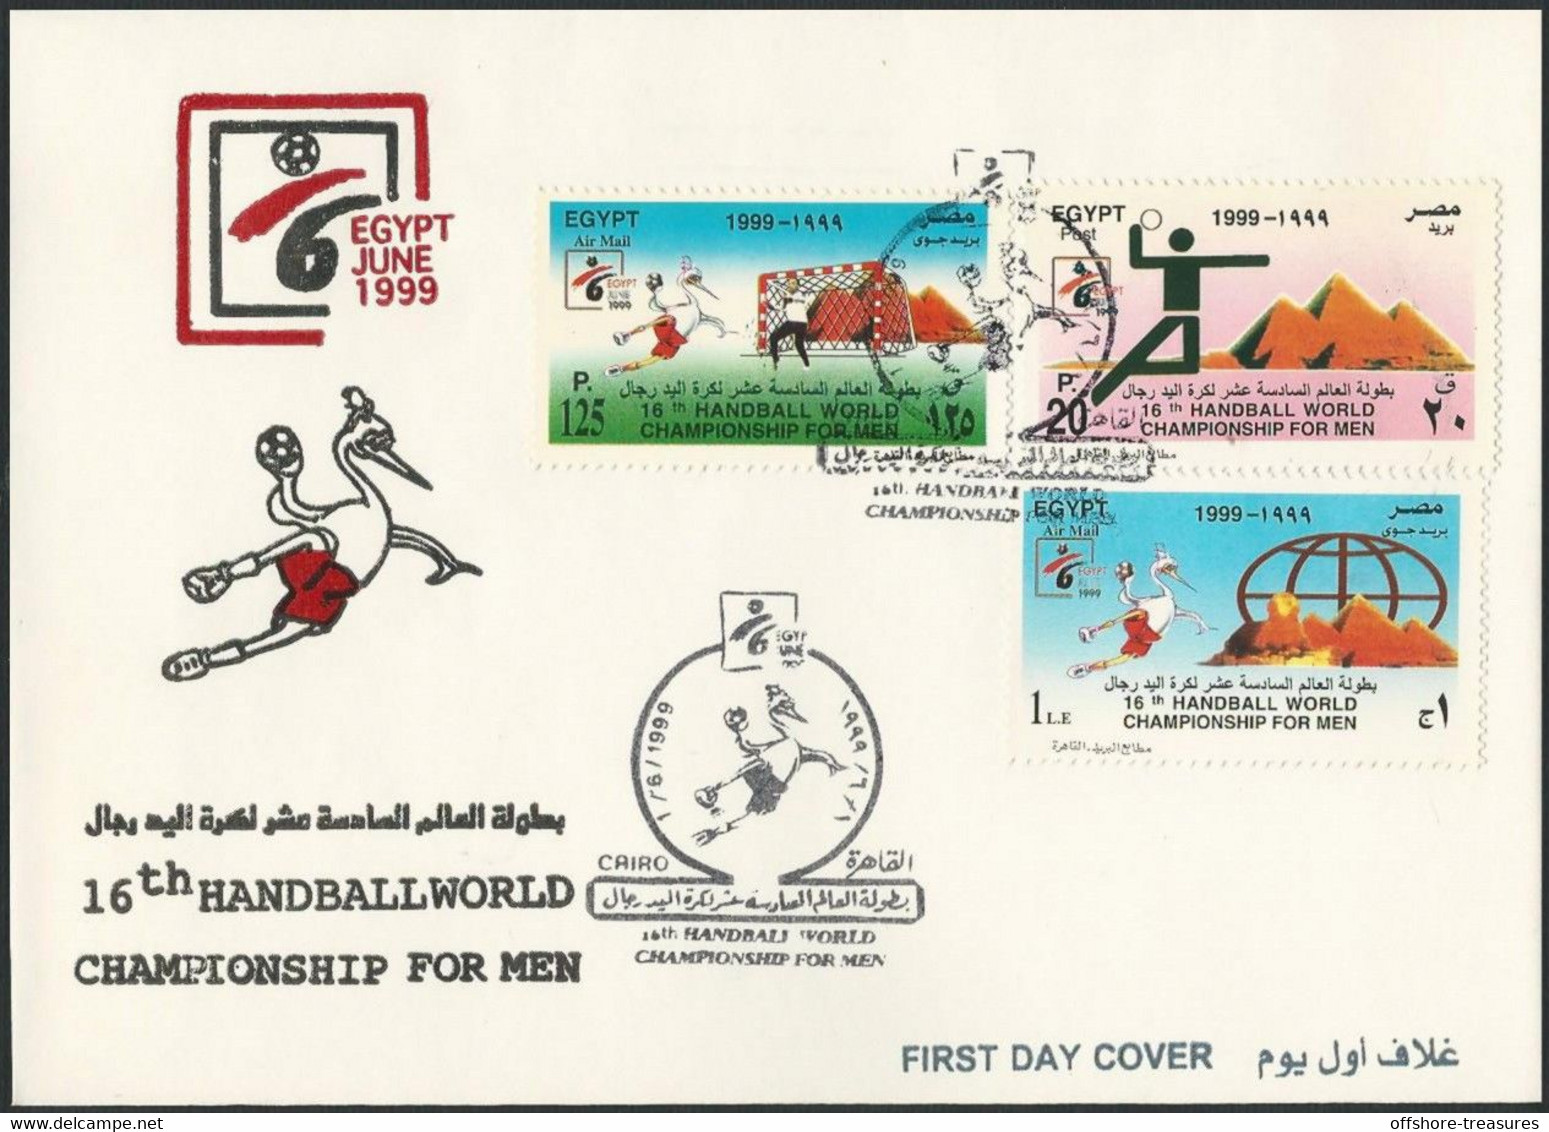 EGYPT Printing Error Variety FDC 1999 16th Handball World Champion Ship Men - FIRST DAY COVER- RED COLOR Missing In LOGO - Lettres & Documents